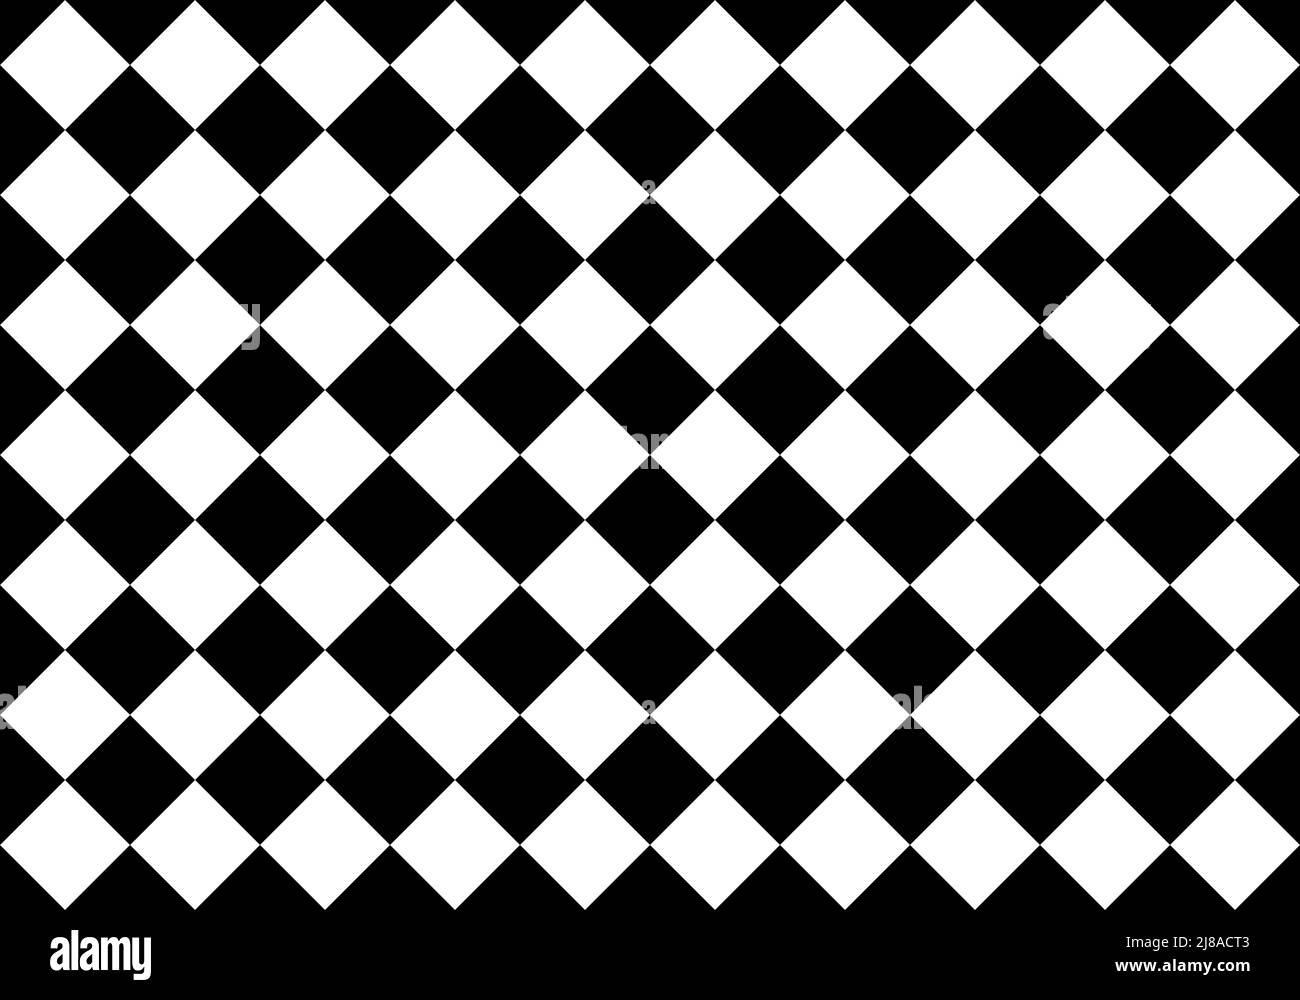 https://c8.alamy.com/comp/2J8ACT3/checkered-squares-in-diagonal-arrangement-seamless-background-pattern-black-and-white-vector-illustration-2J8ACT3.jpg